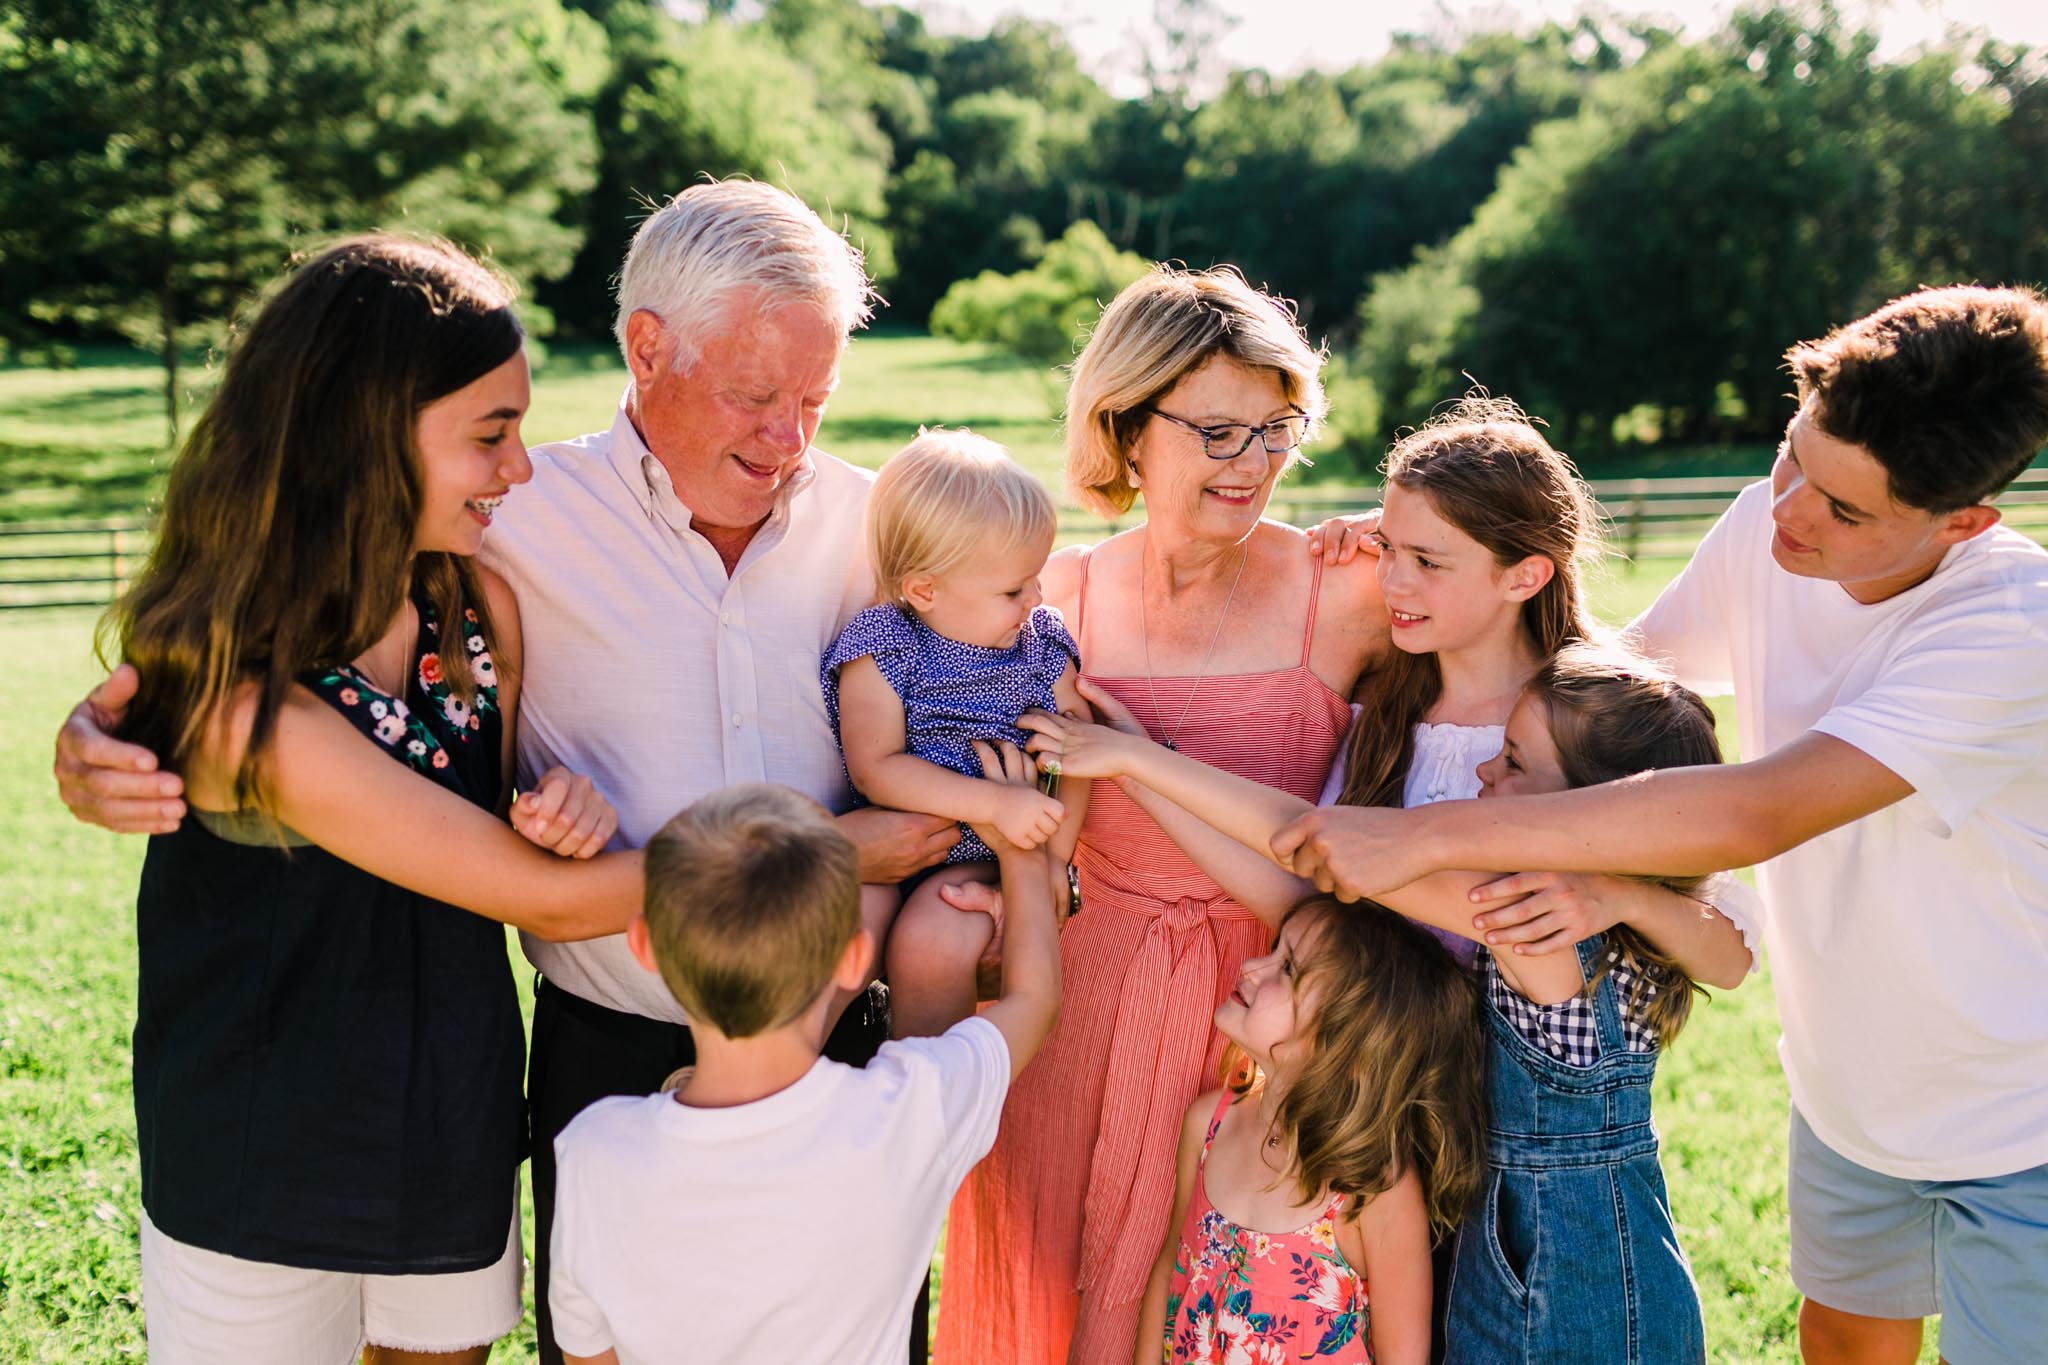 Durham Family Photographer | By G. Lin Photography | Candid photo of grandparents with grandkids outdoors